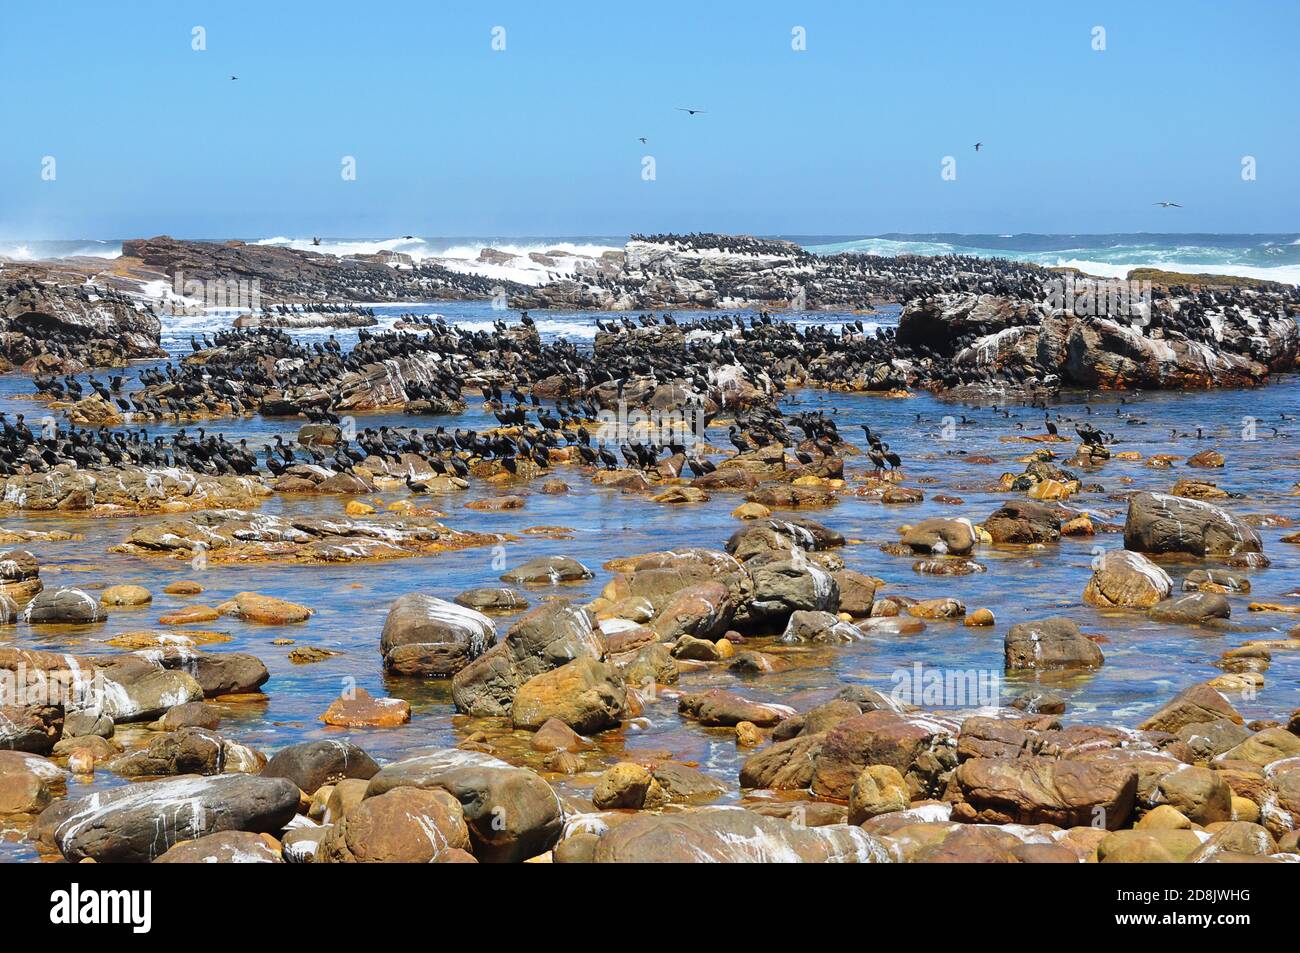 Cormorant colony on a rocky beach at Cape of Good Hope, South Africa Stock Photo